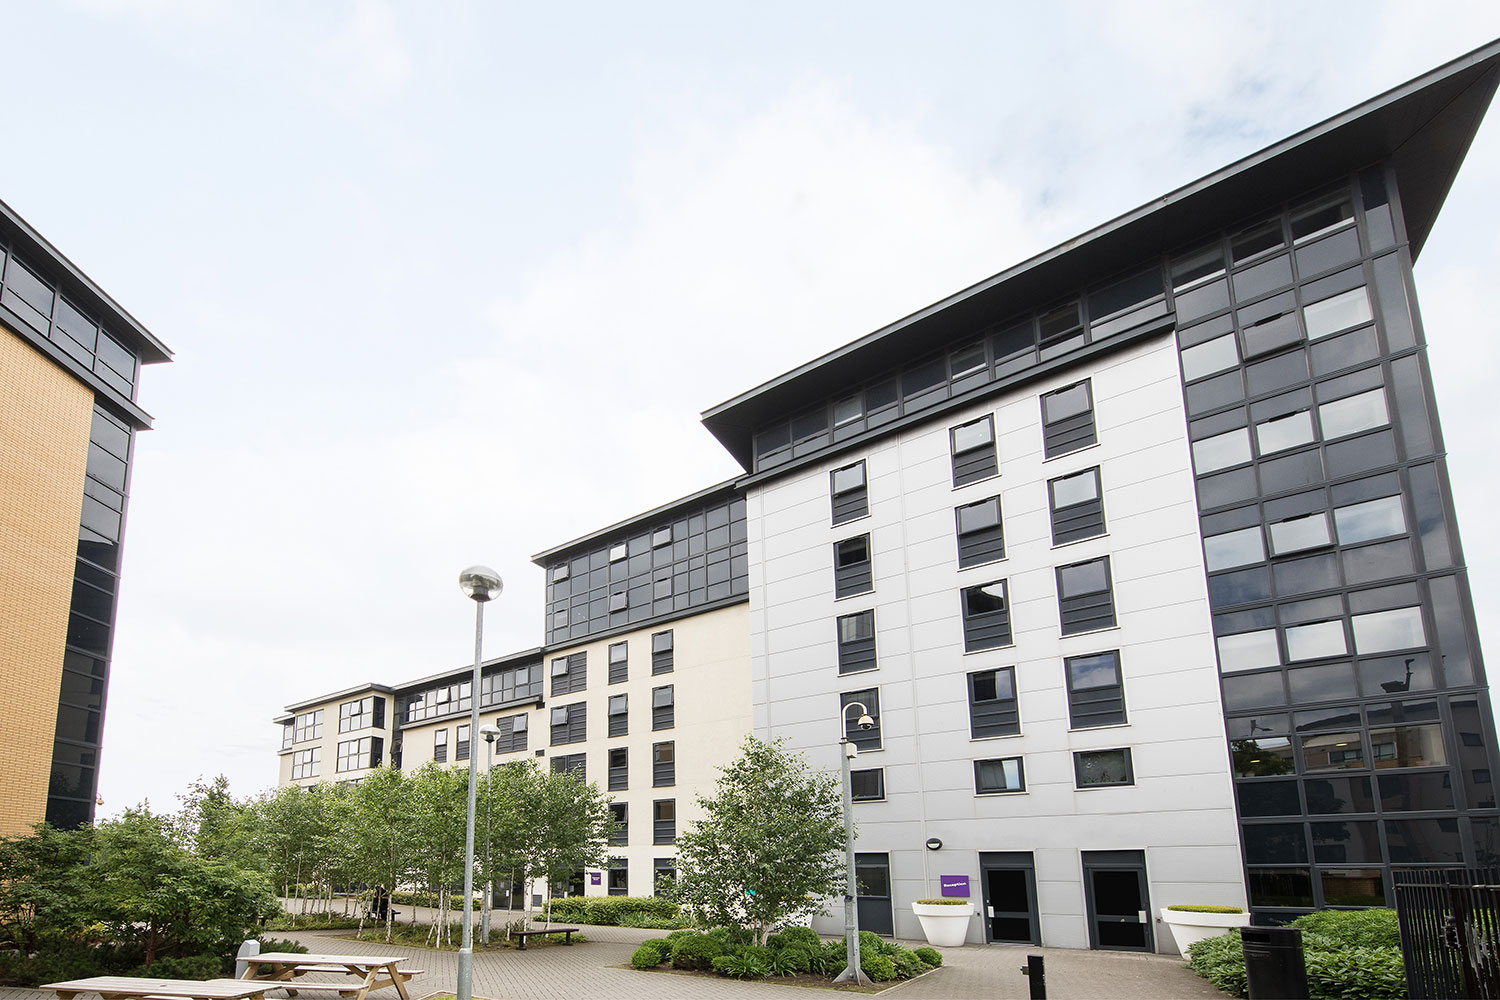 Unite Students accommodation at Adam Street Gardens in Cardiff